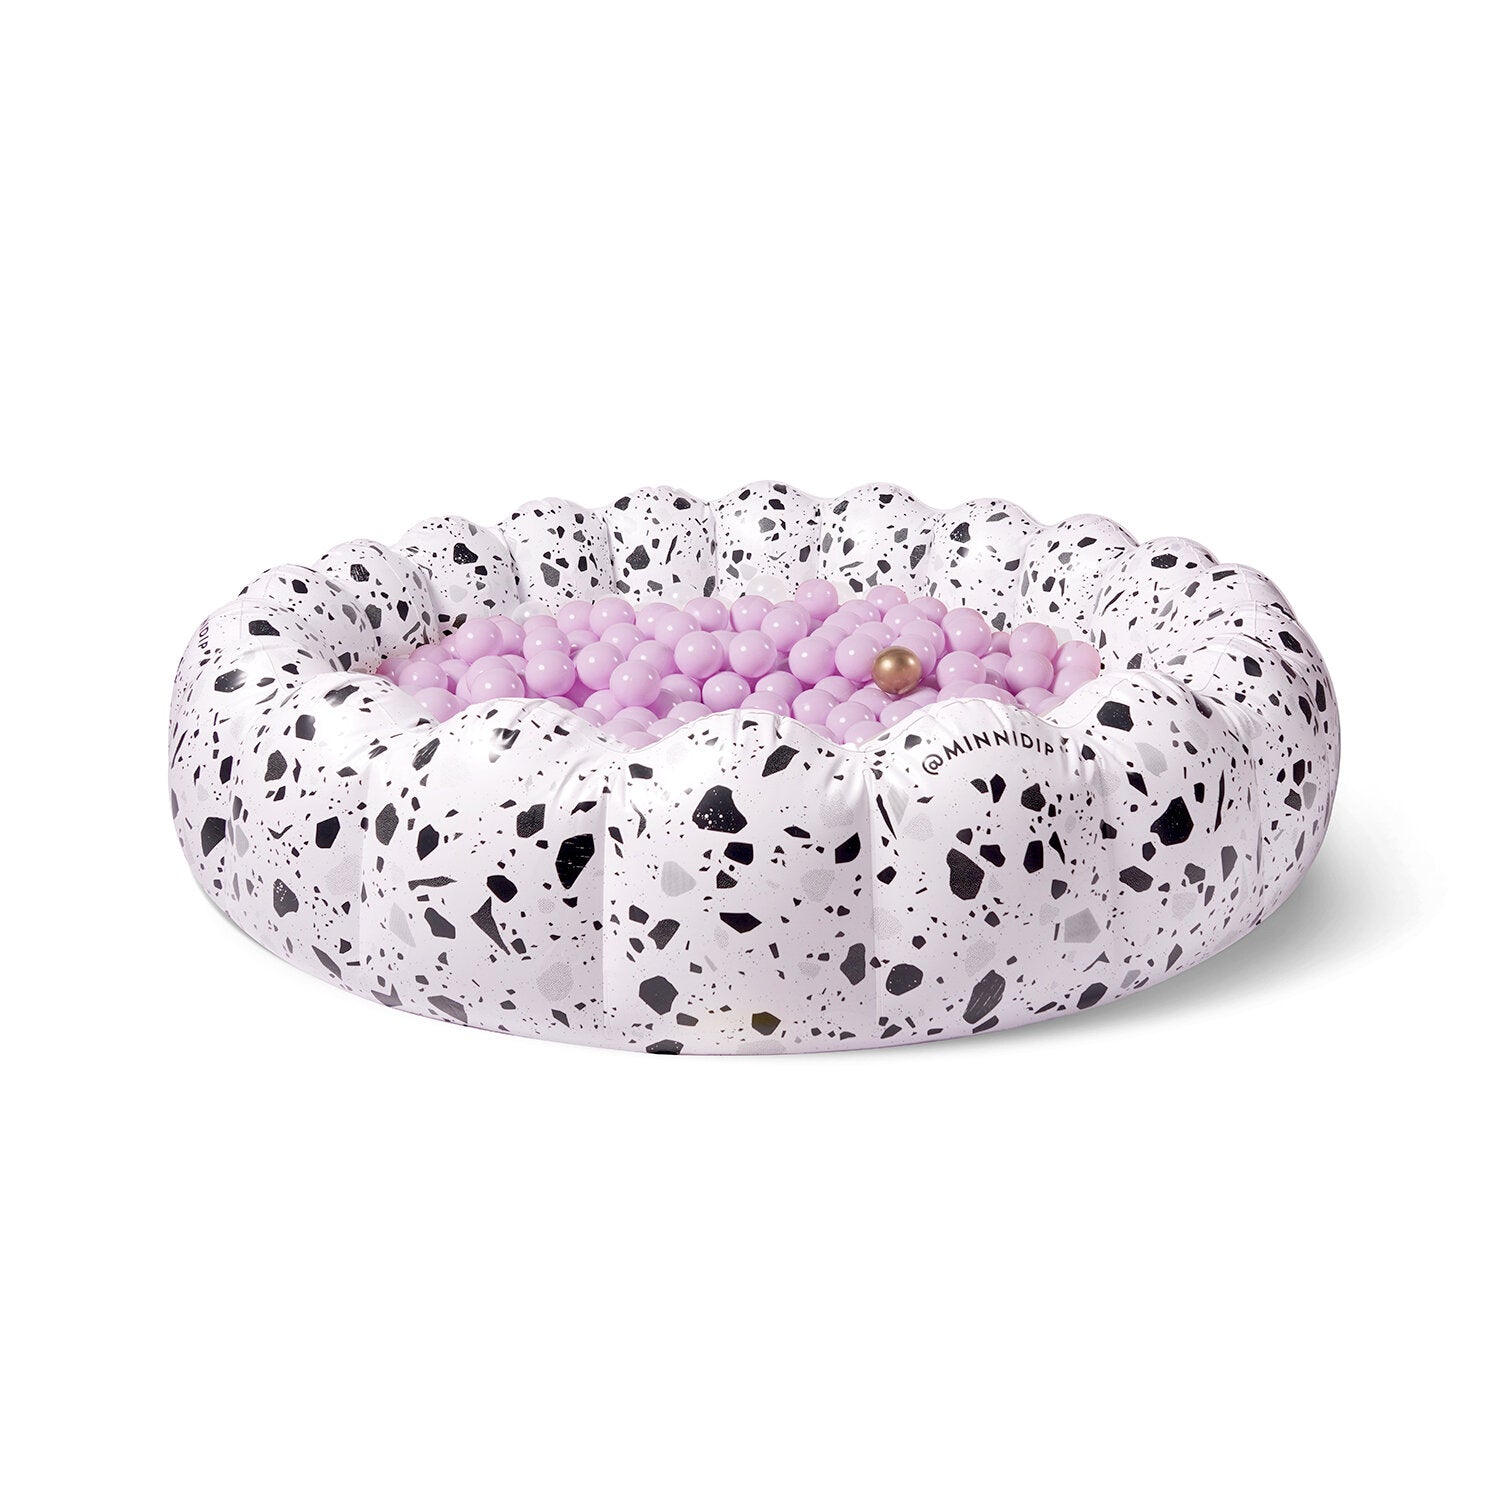 The DiPP!T™ Ball Pit in SPECKLED TERRAZZO